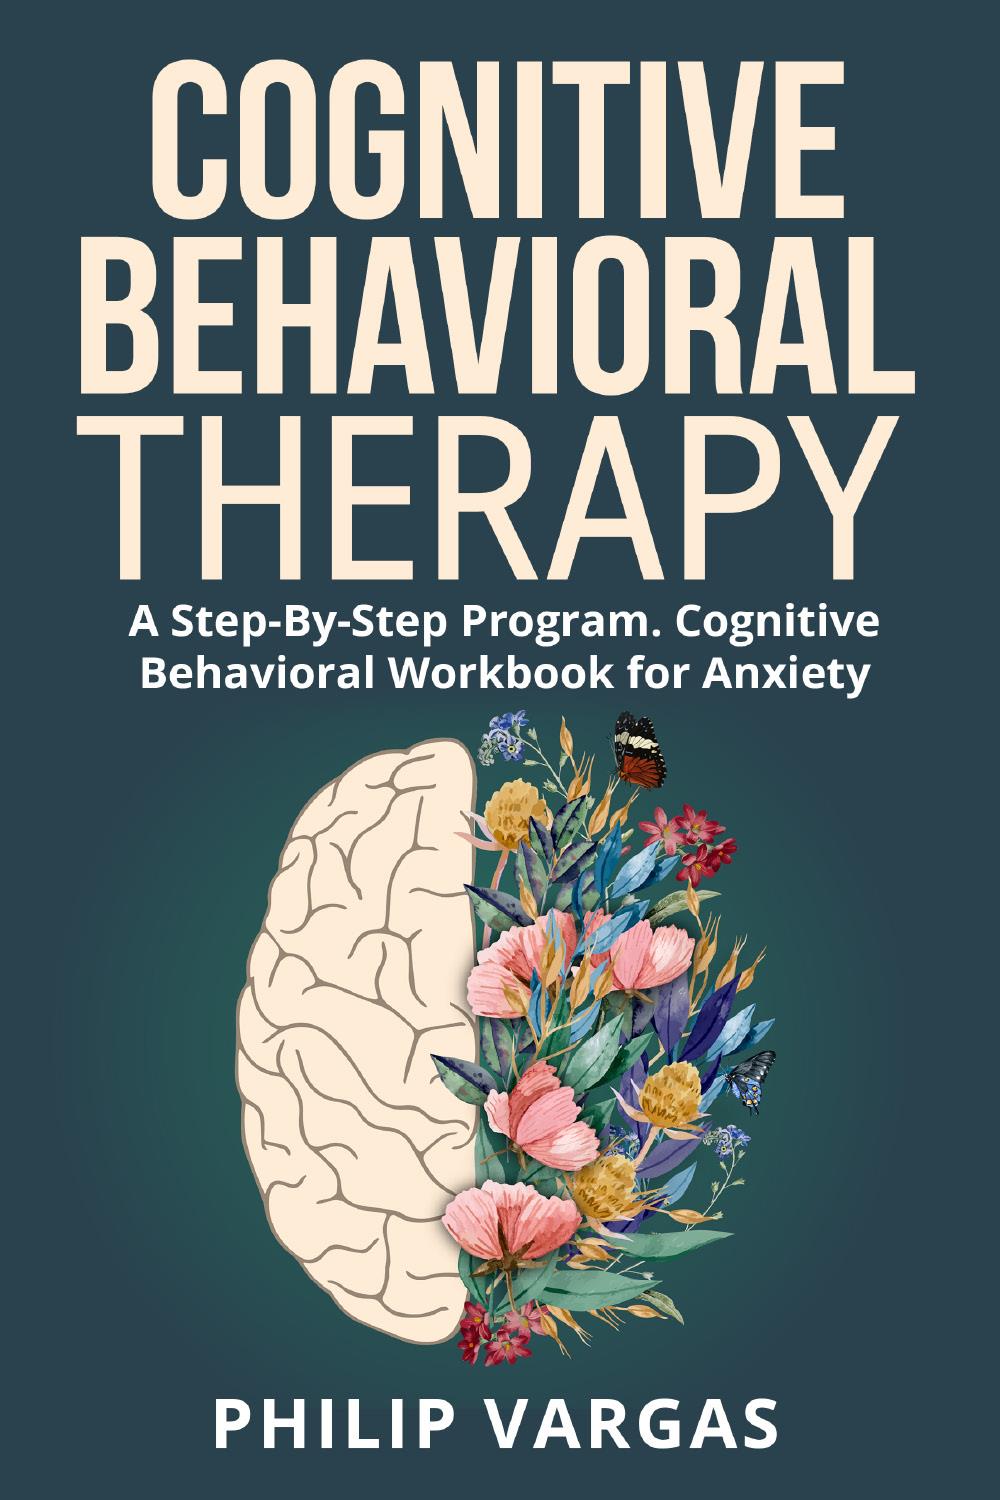 Cognitive Behavioral Therapy. A Step-By-Step Program. Cognitive Behavioral Workbook for Anxiety